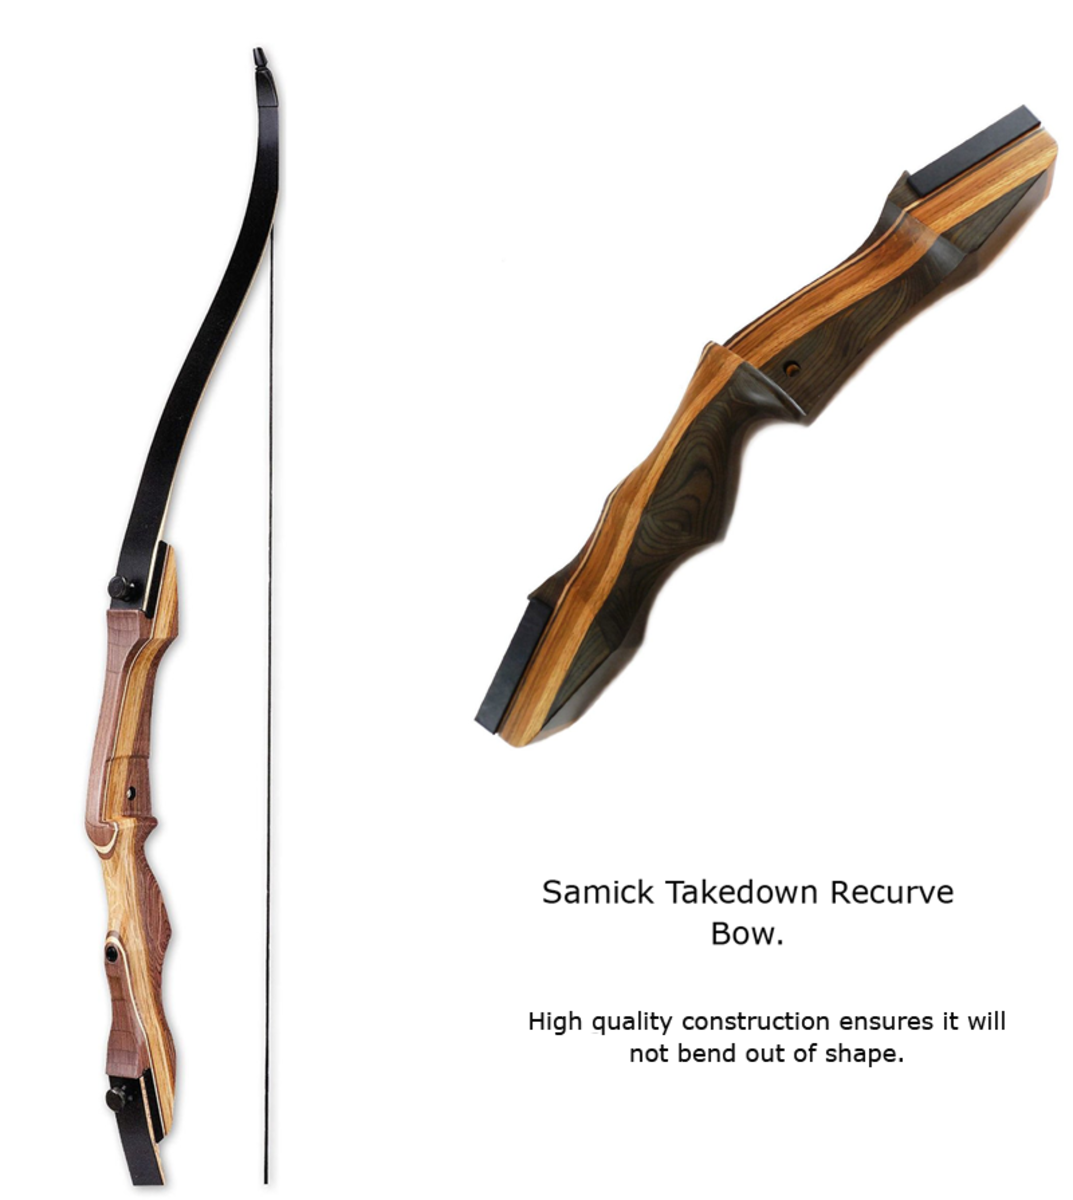 Precisely engineered bow from Samick.